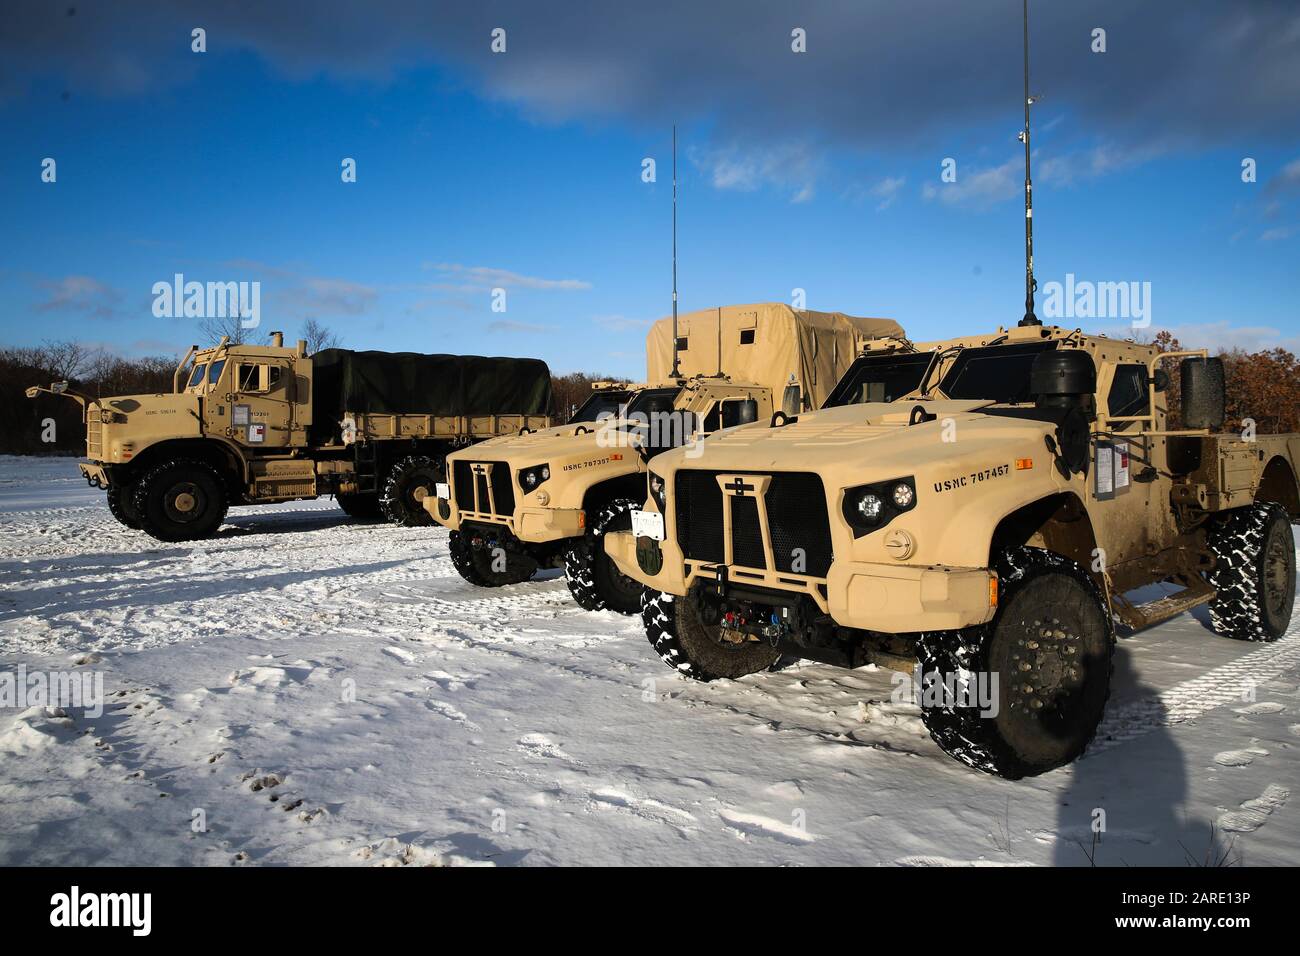 Vehicles from 4th Marine Regiment, 3rd Marine Division, prepare to drive off for a cold weather convoy during exercise Northern Viper on Hokudaien Training Area, Hokkaido, Japan, Jan. 25, 2020. Northern Viper is a regularly scheduled training exercise that is designed to enhance the collective defense capabilities of the U.S. and Japan Alliance by exposing members of both forces to intense training in an austere environment, allowing them to perfect their skills in any clime and place. (U.S. Marine Corps Photo By Cpl. Cameron E. Parks) Stock Photo